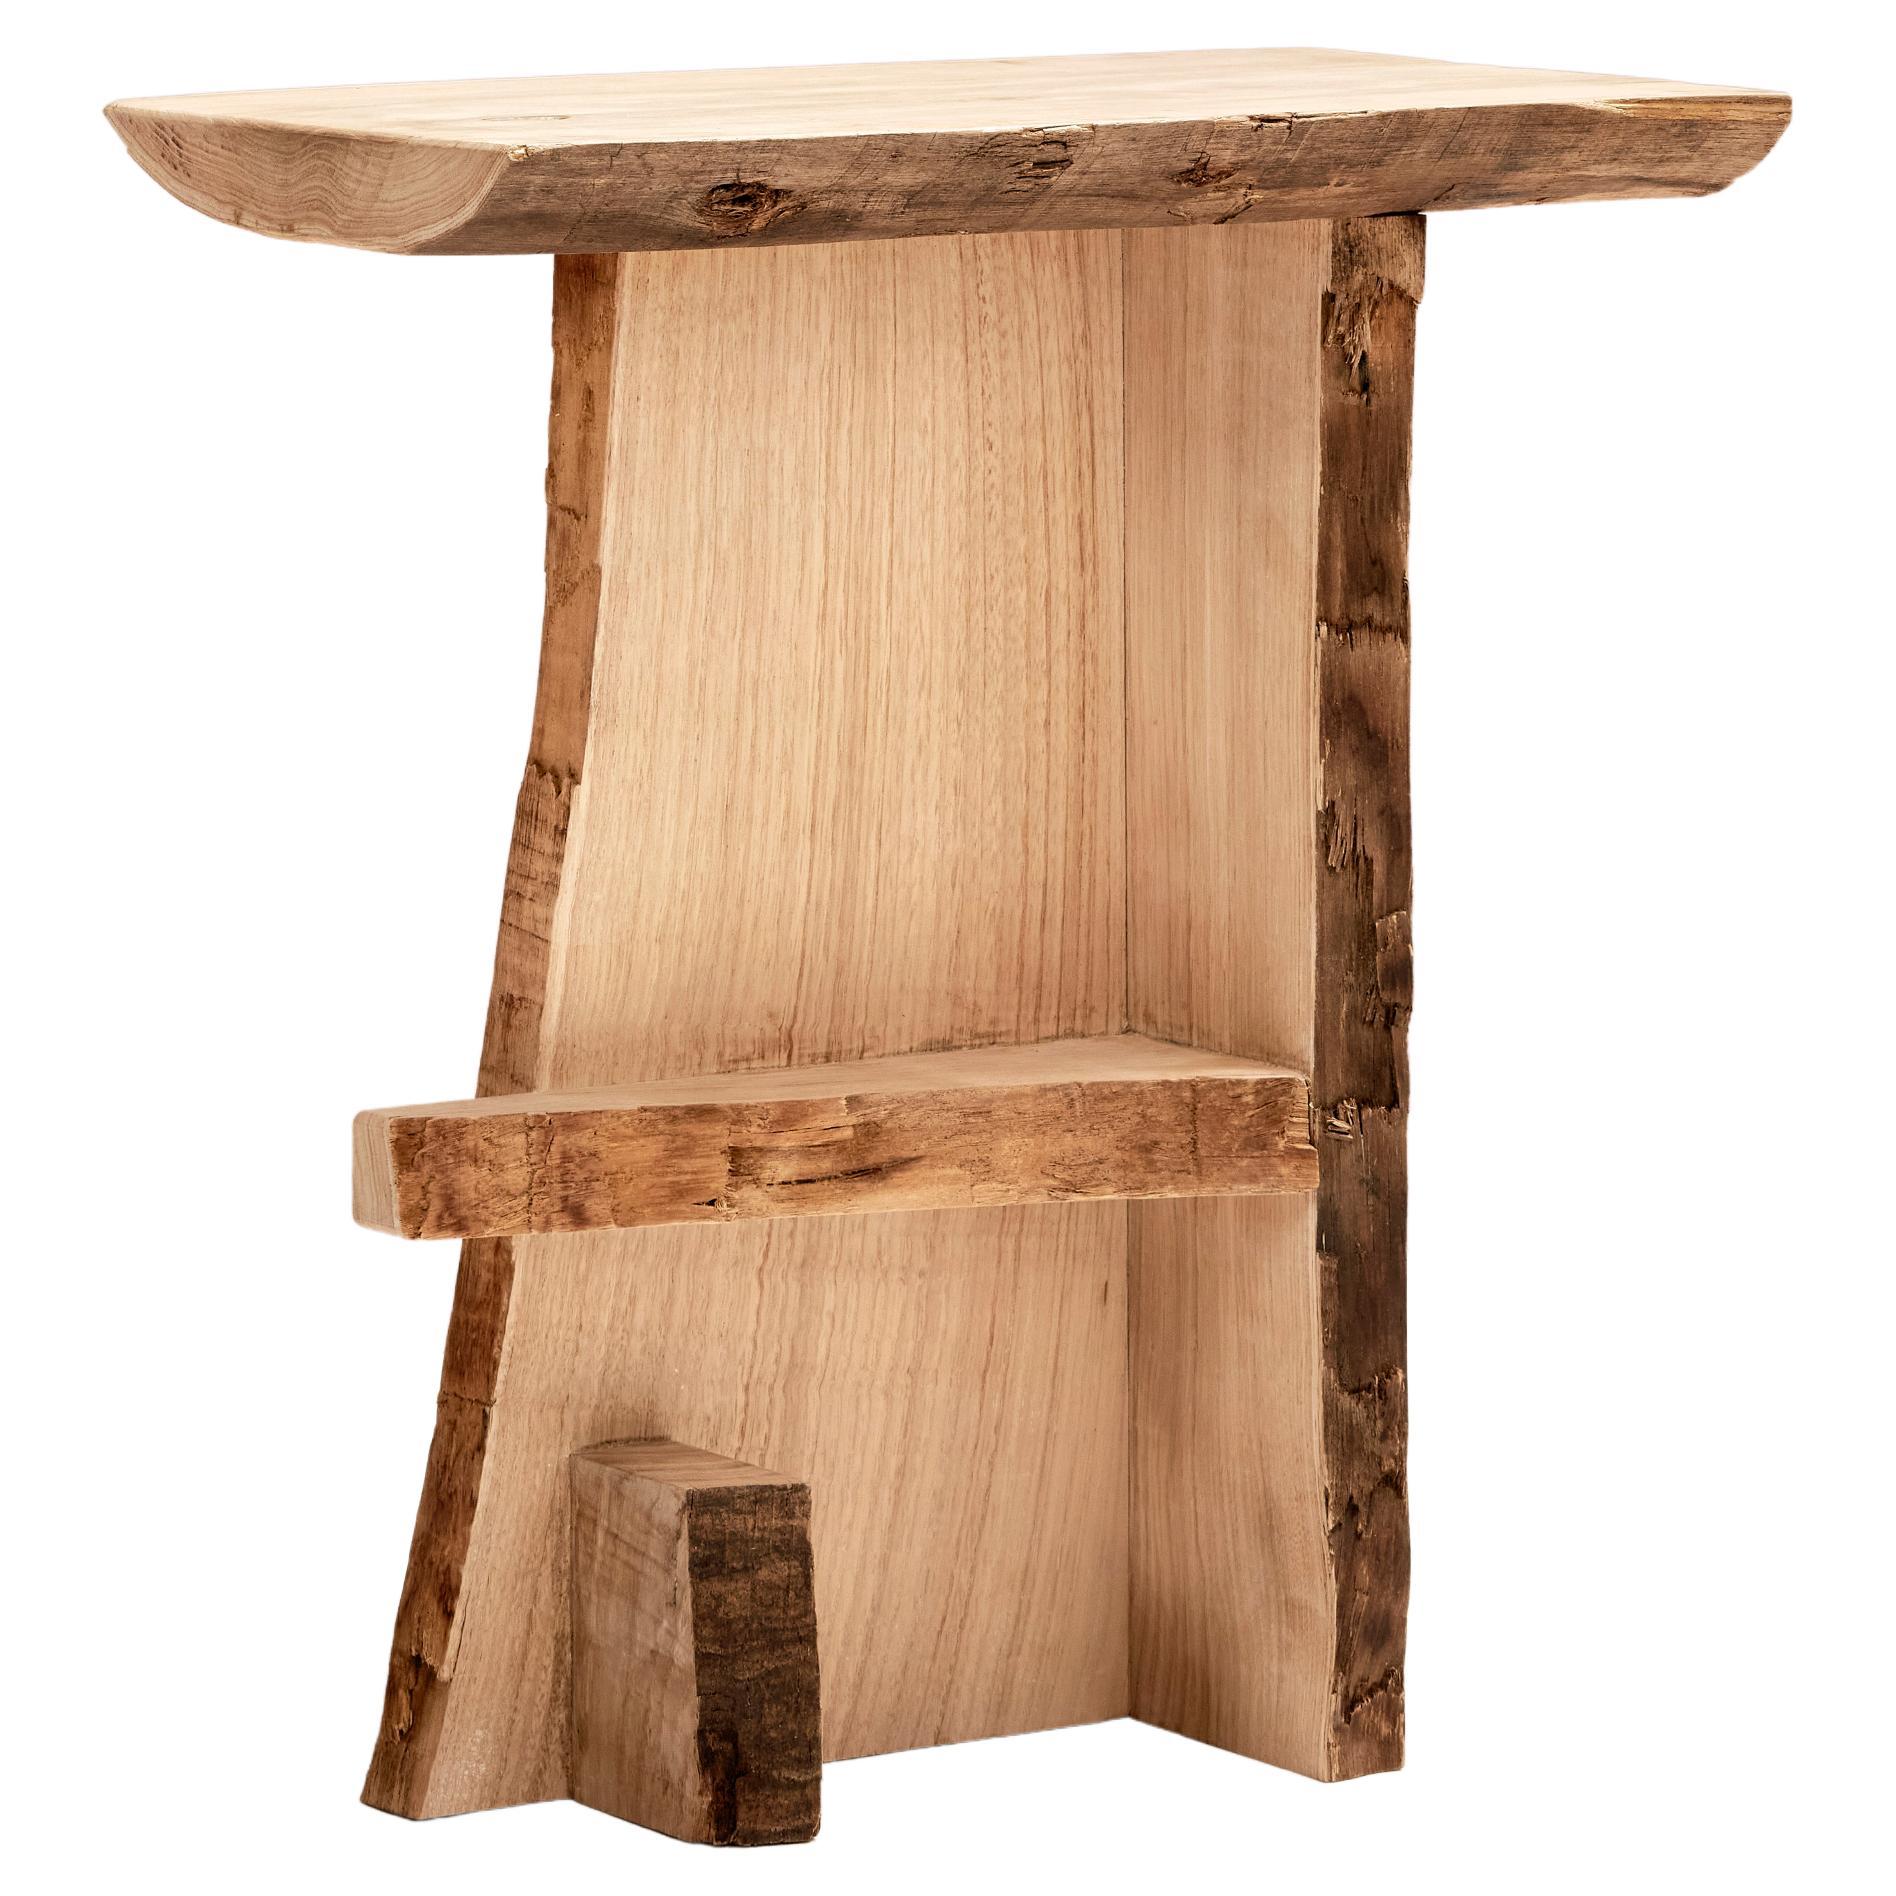 Ripped Wood Table by Willem Van Hooff For Sale